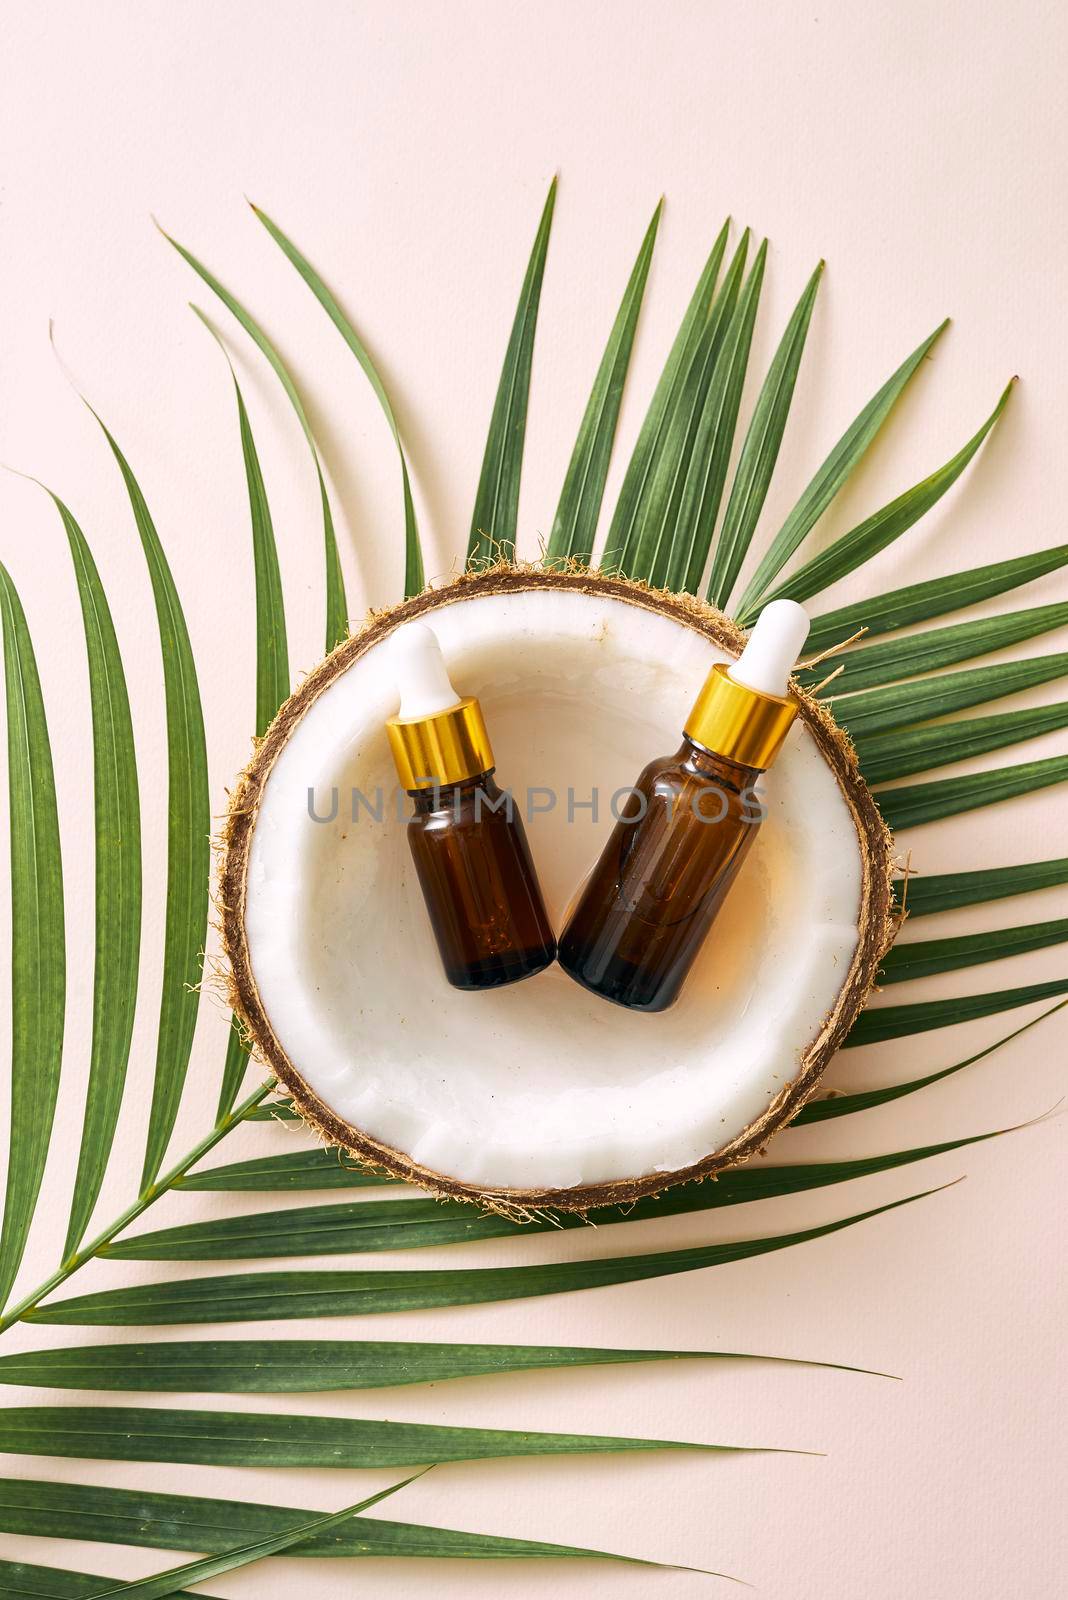 Coconut oil in bottle with open nuts and pulp in jar, green palm leaf background. Natural cosmetic products. by makidotvn